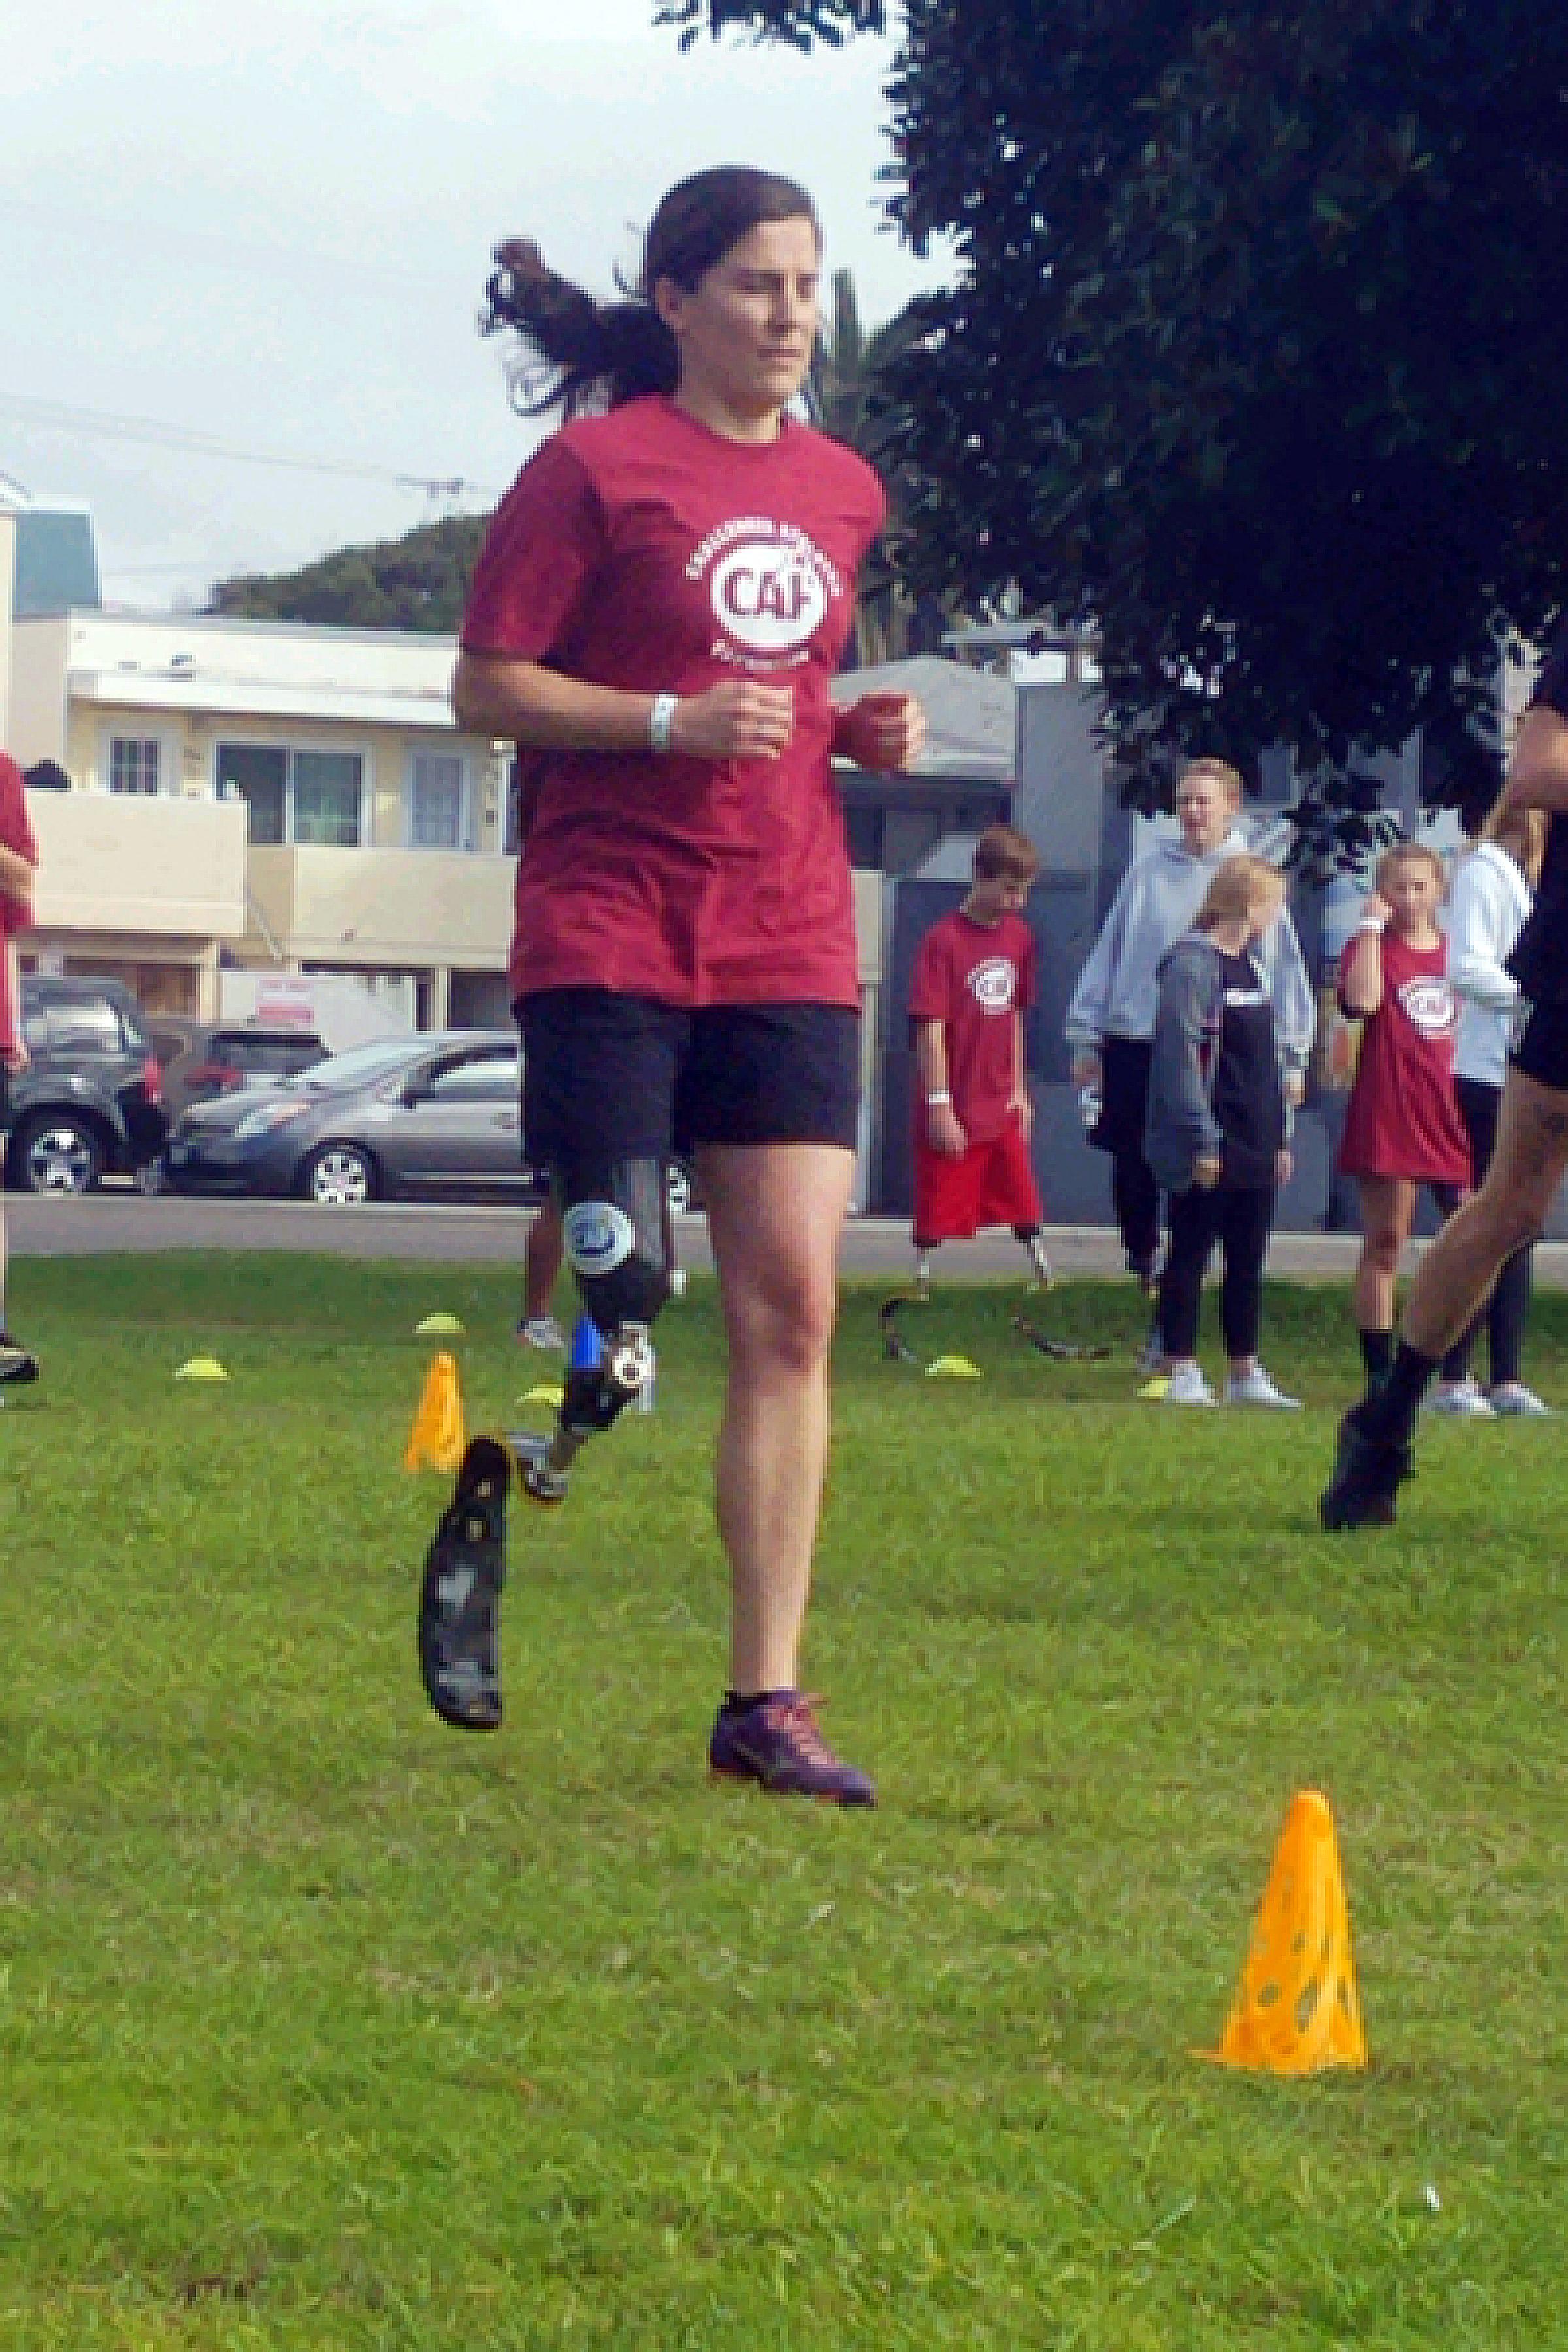 Jenny participating in an amputee running clinic sponsored by The Challenged Athletes Foundation